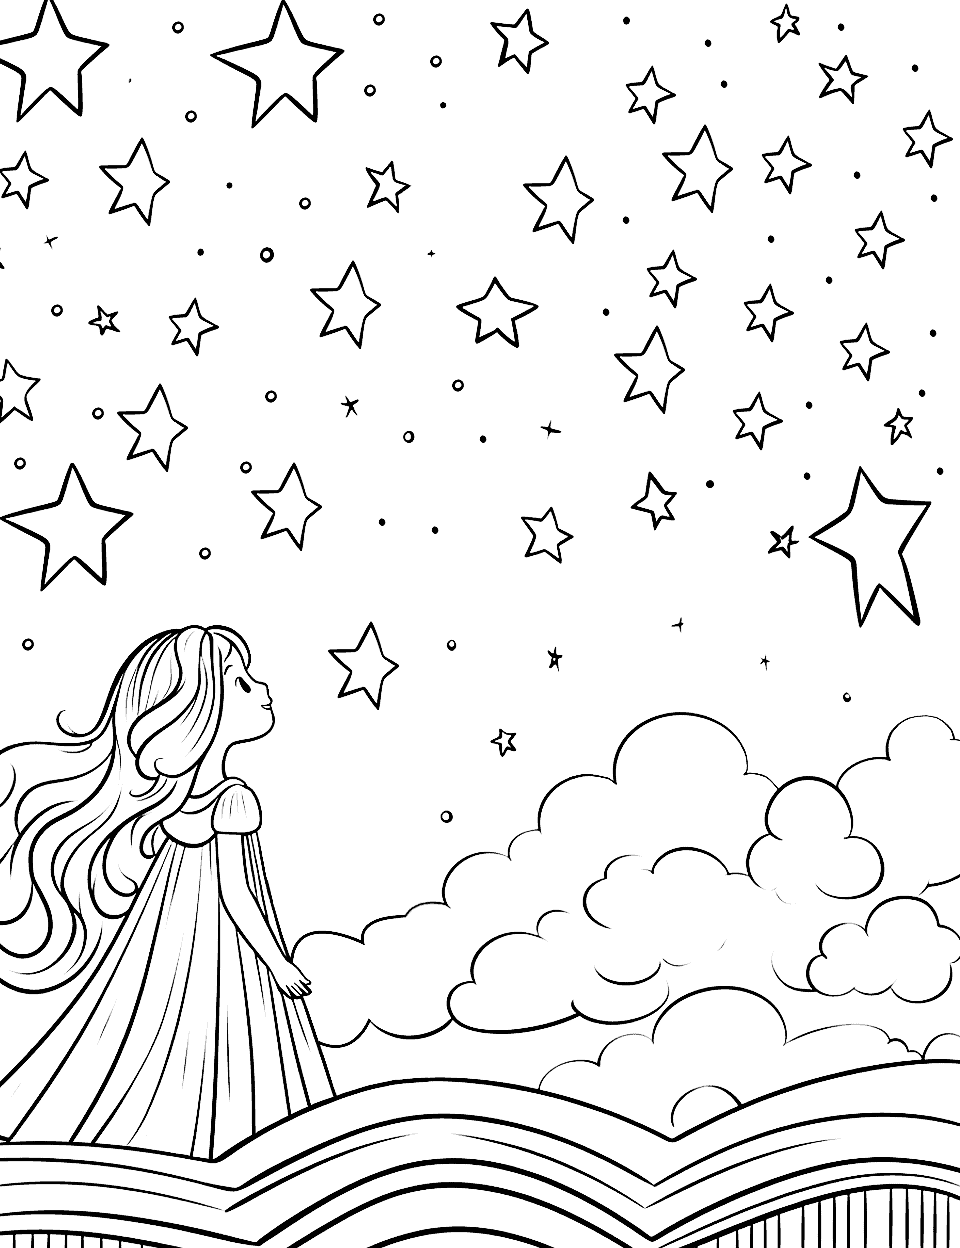 Princess and Star Coloring Page - A princess looking up at a glowing star in the night sky from her castle roof.